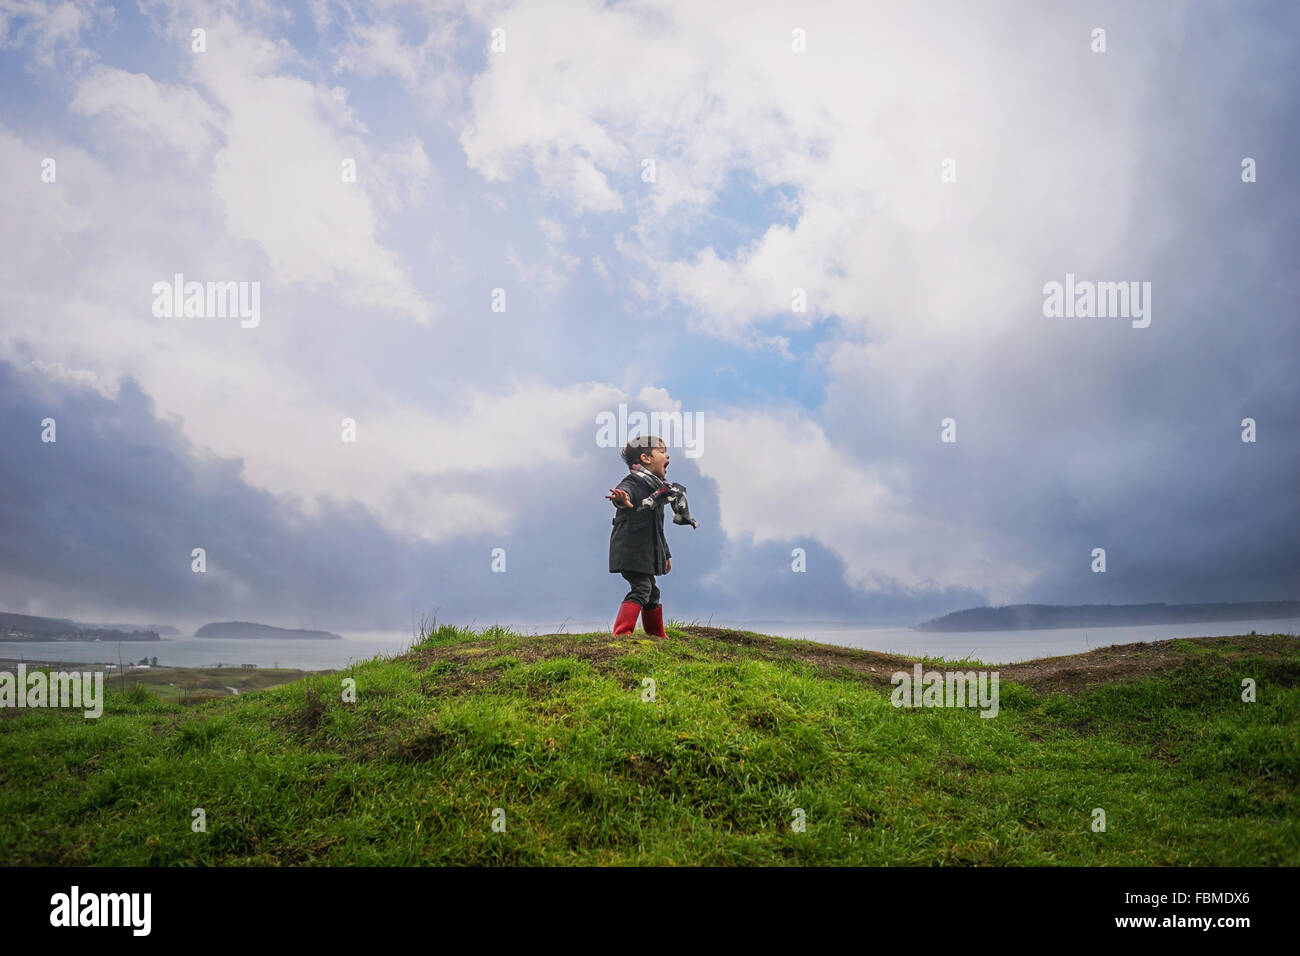 Boy standing on a hill shouting Stock Photo